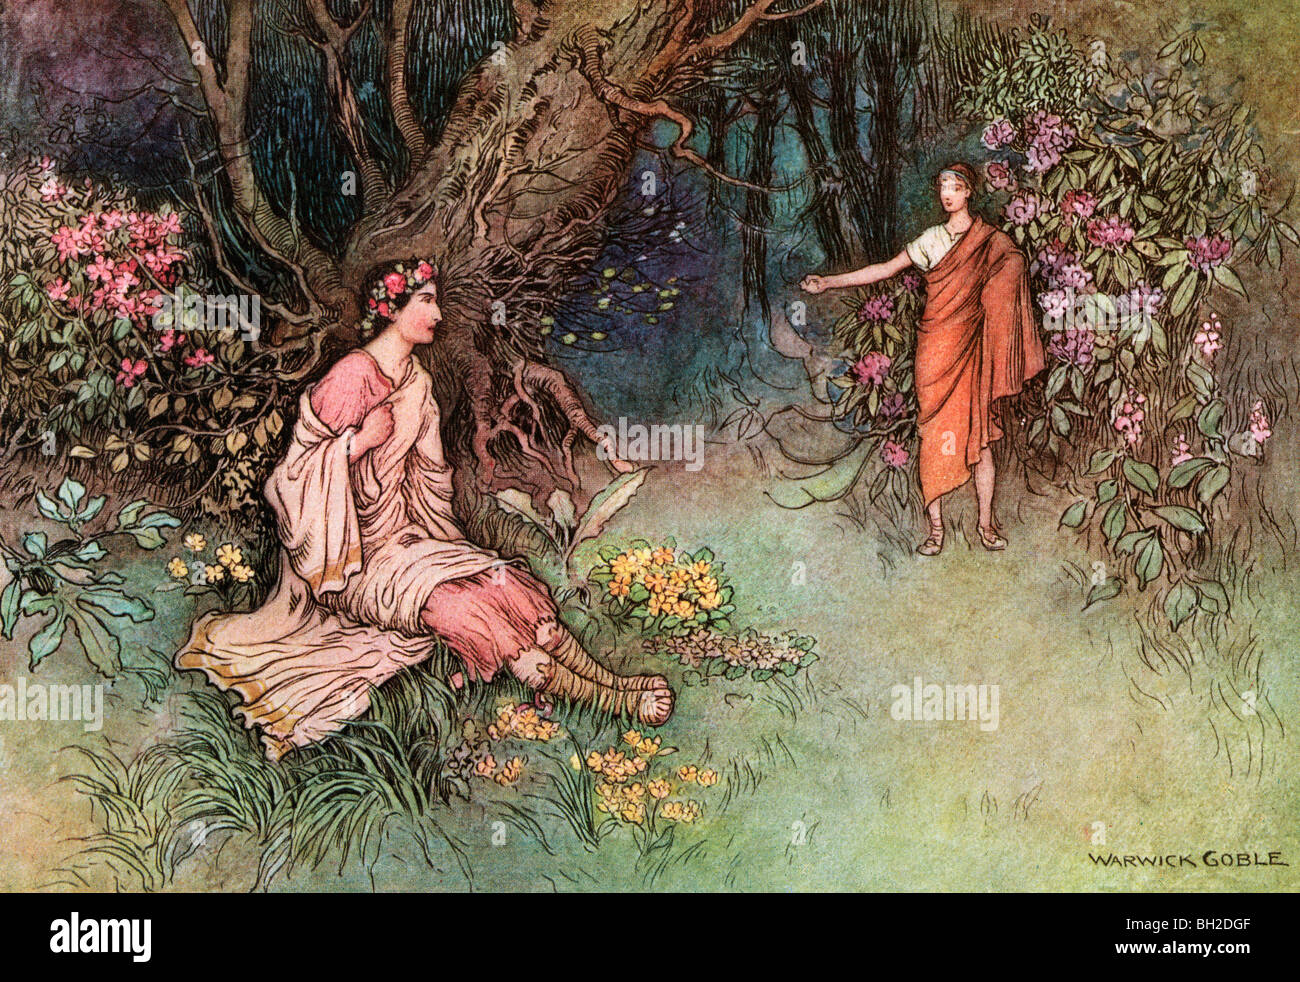 The Meeting in the Woods, by Warwick Goble, from The Complete Poetical Works of Geoffrey Chaucer, 1912 Stock Photo